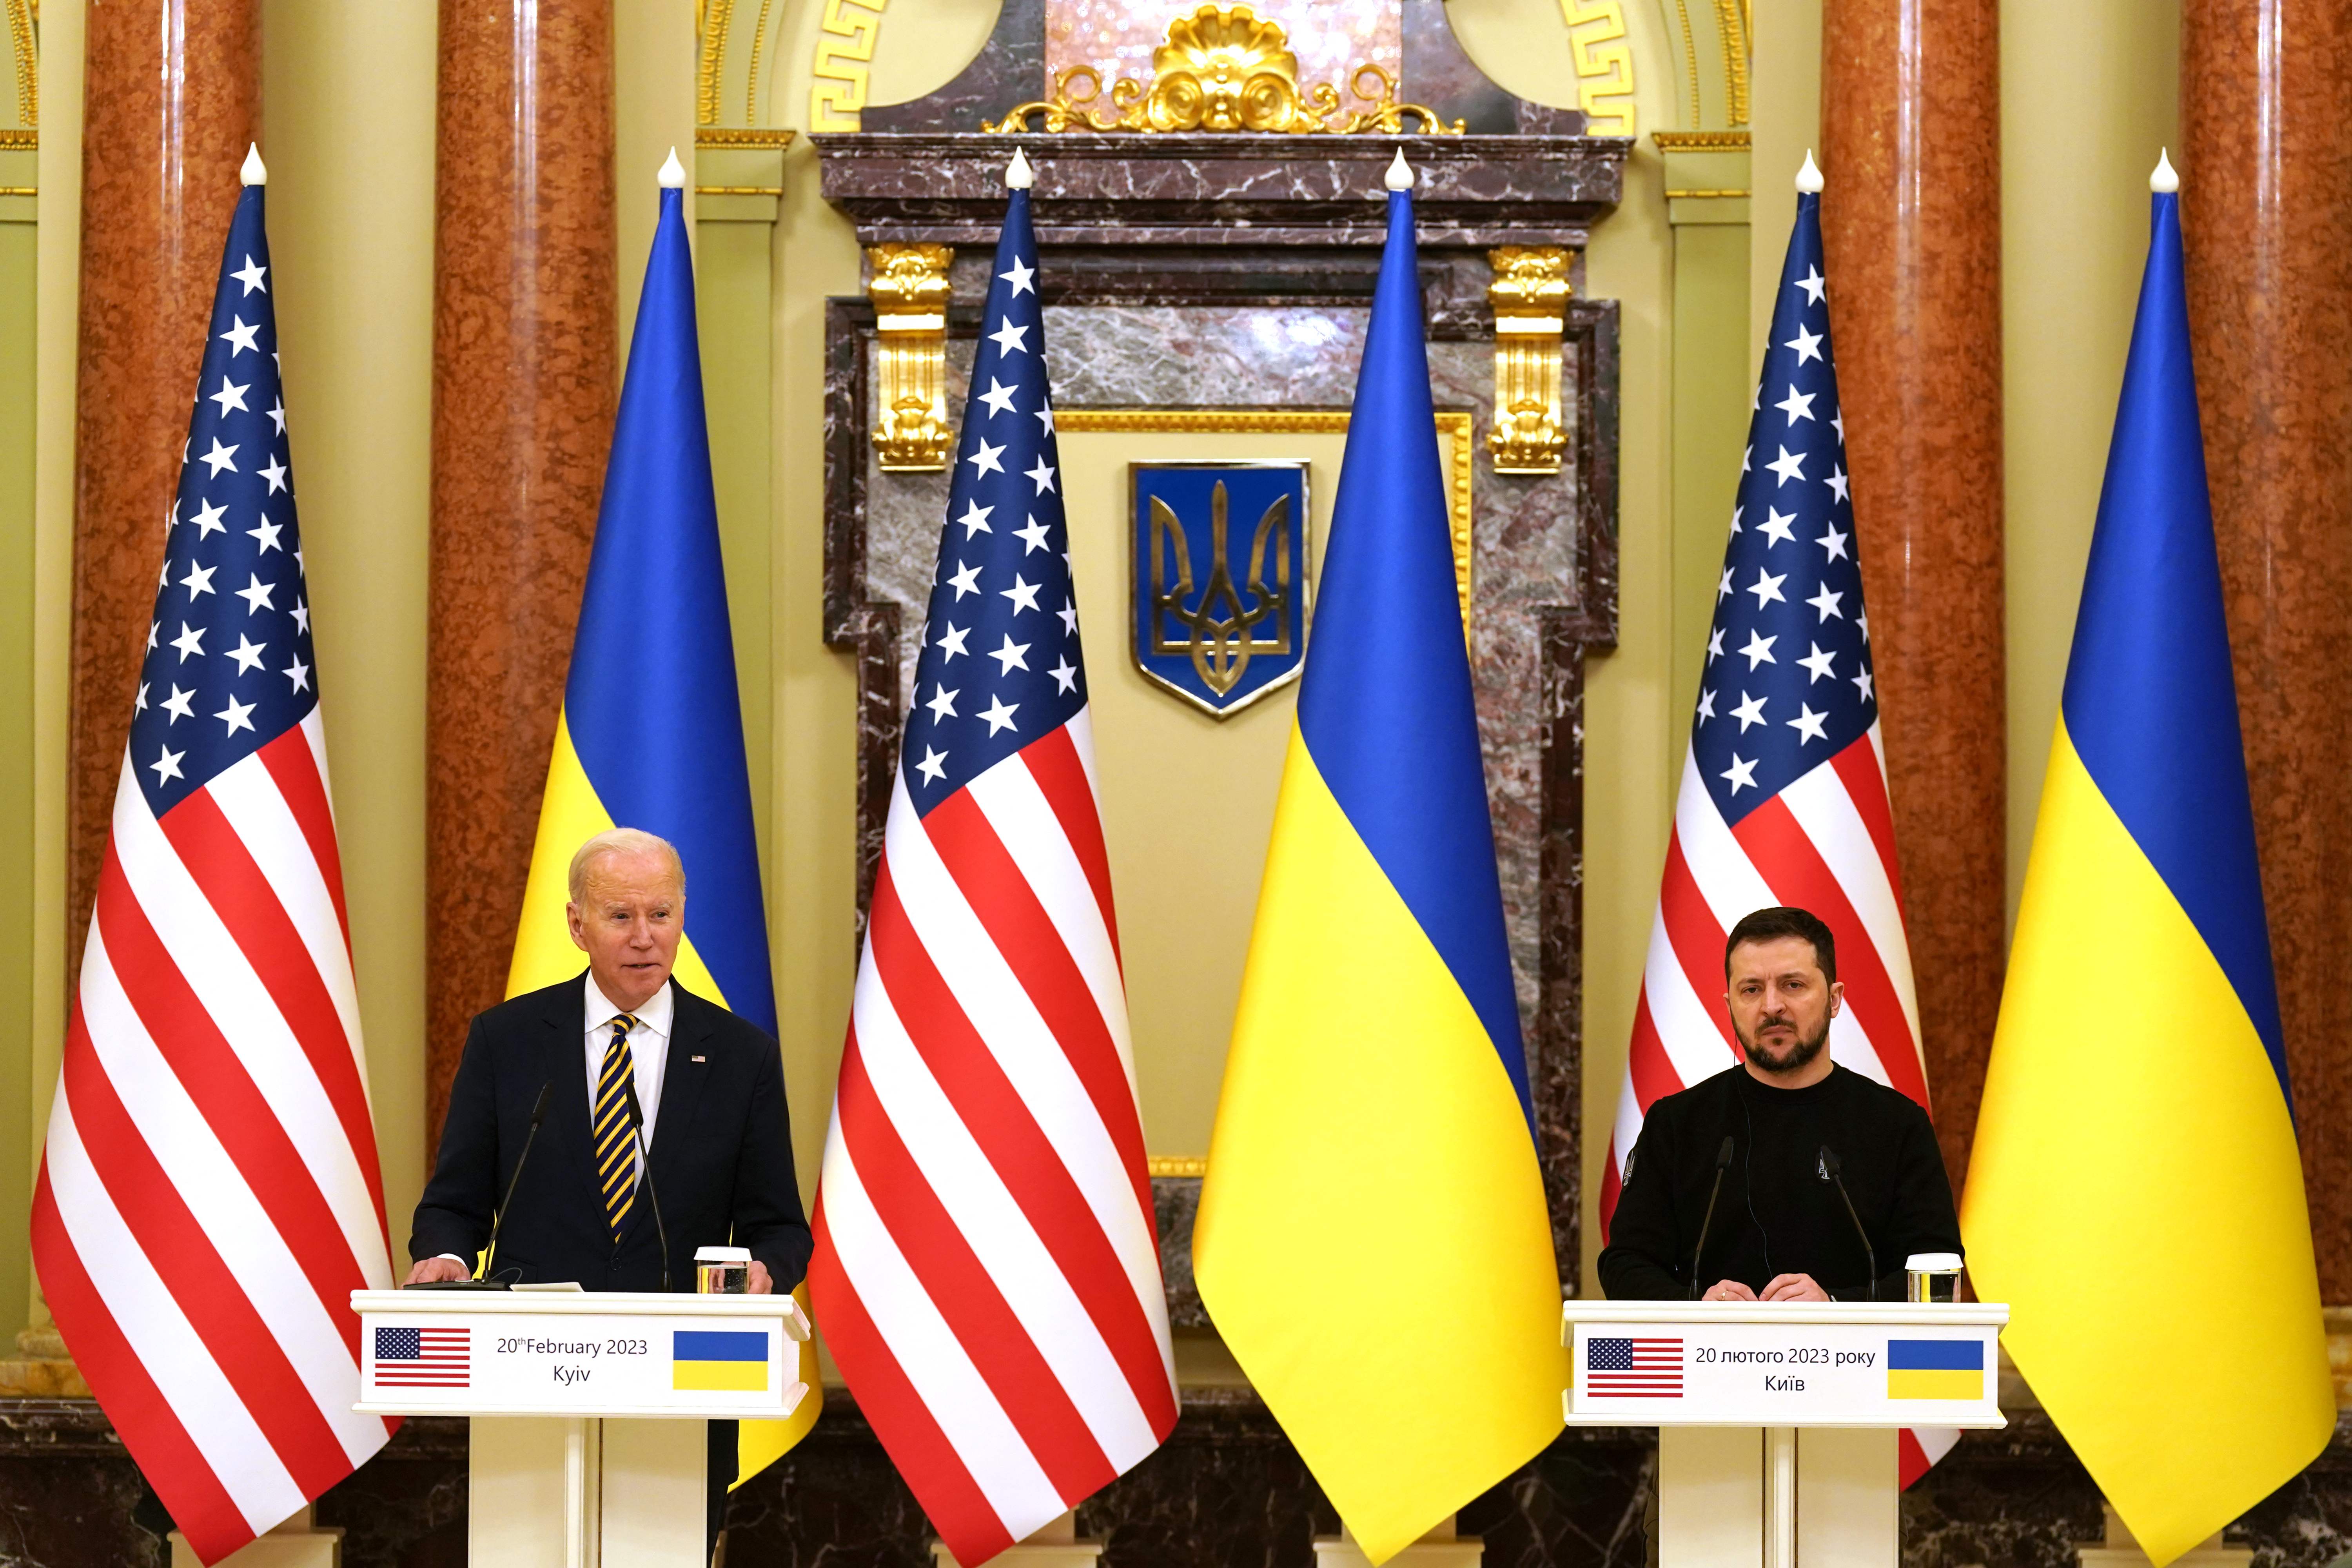 Biden and Zelensky speak together ahead of the one-year anniversary of the war